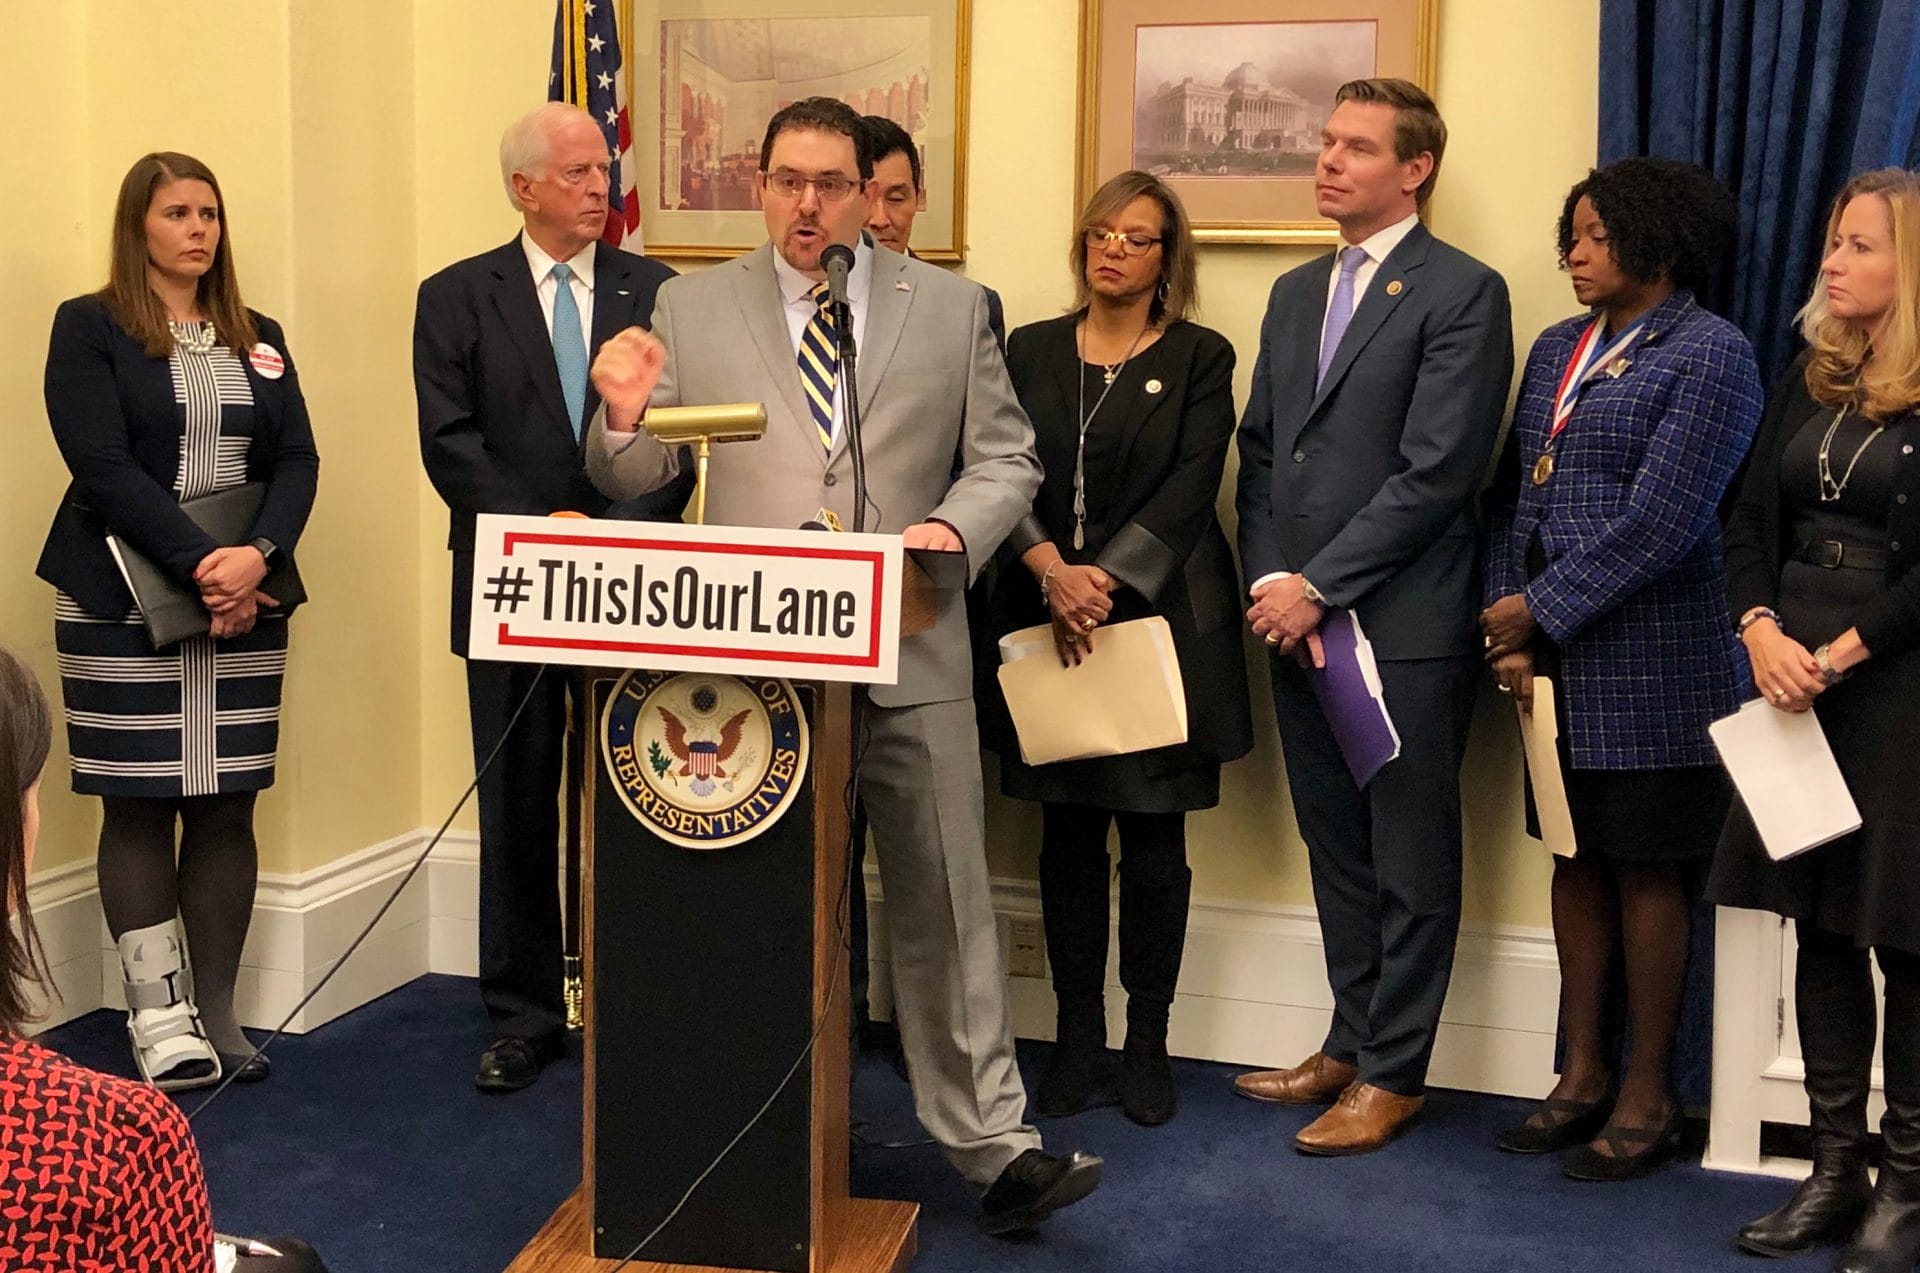 Dr. Sakran speaks at a press conference on gun violence prevention with congressional leaders and medical professionals.